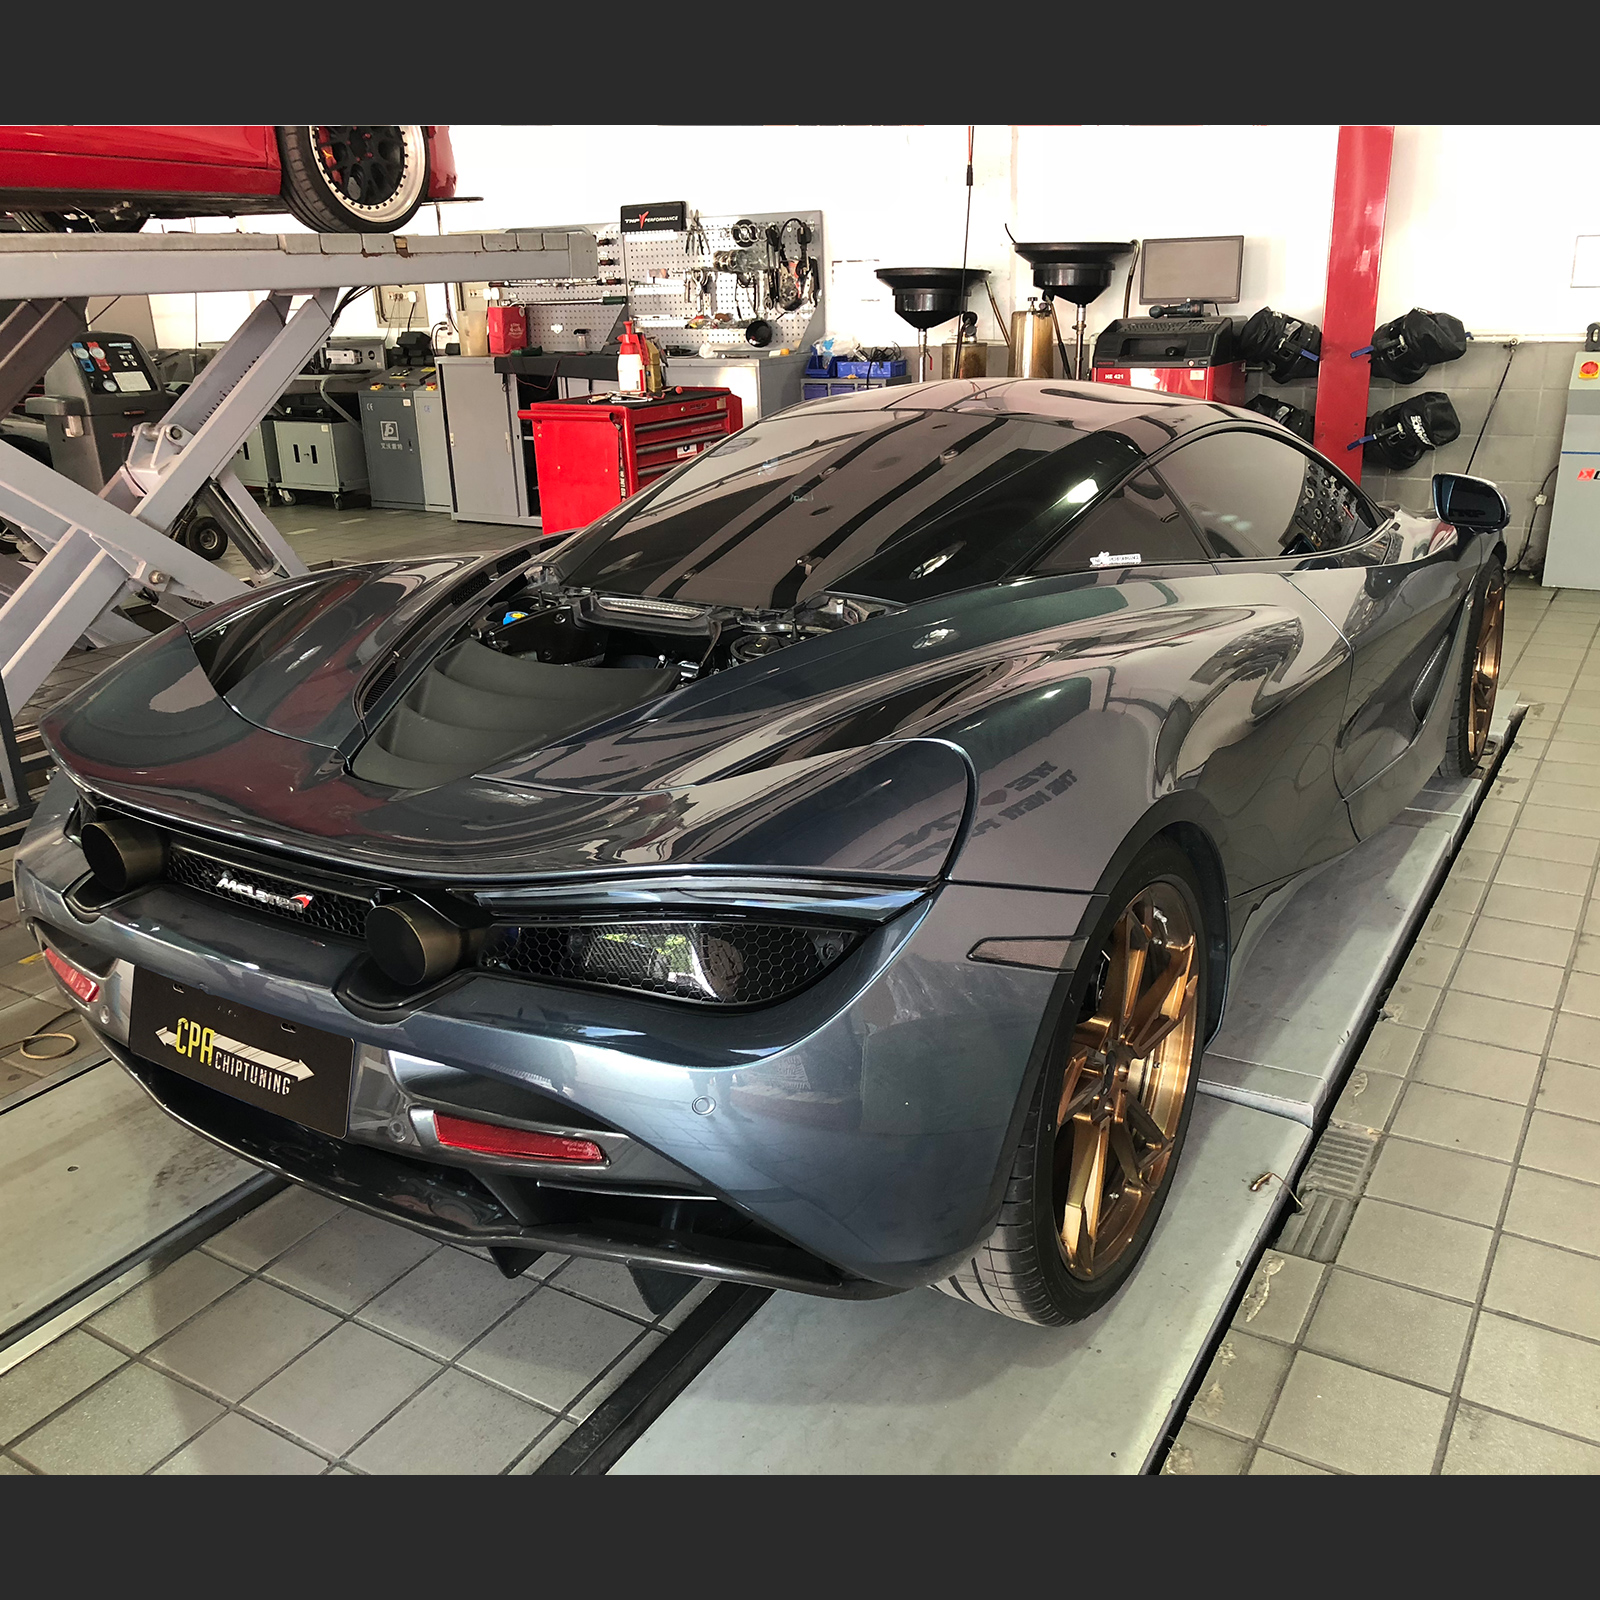 Faster than the competition - the McLaren 720S